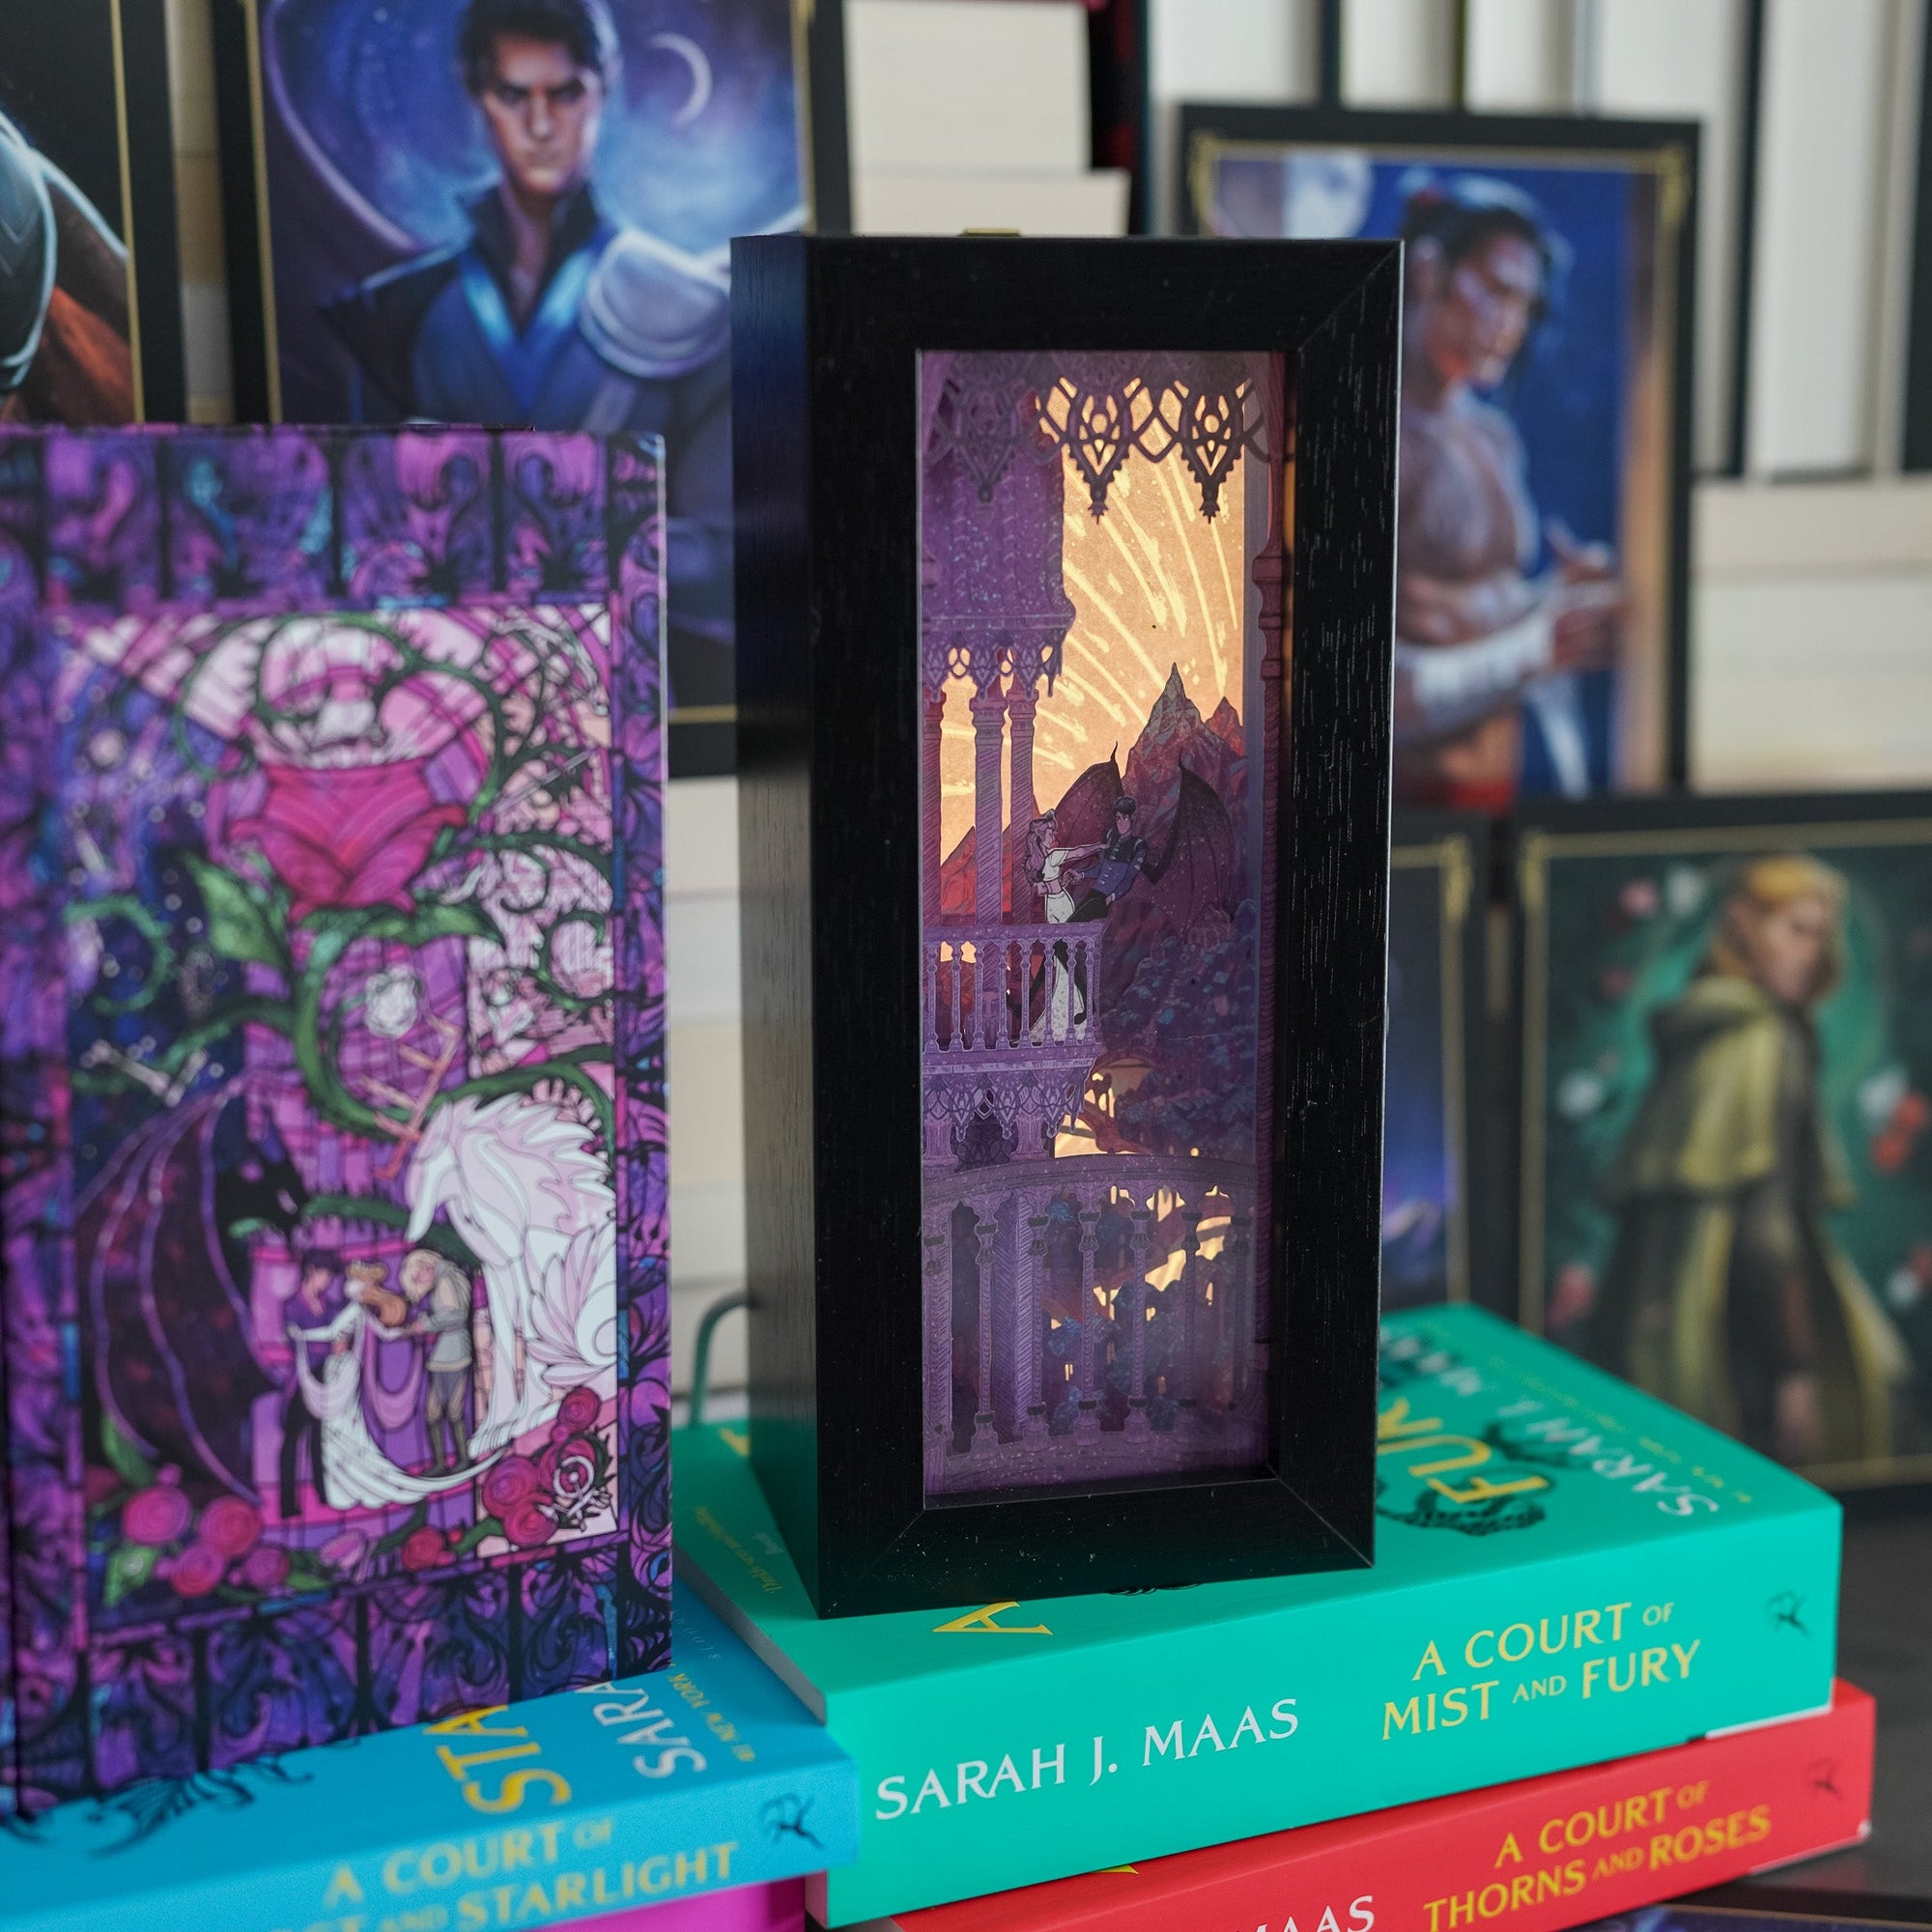 ACOTAR Velaris Bookshelf Alley is black framed with a purple scene from the book